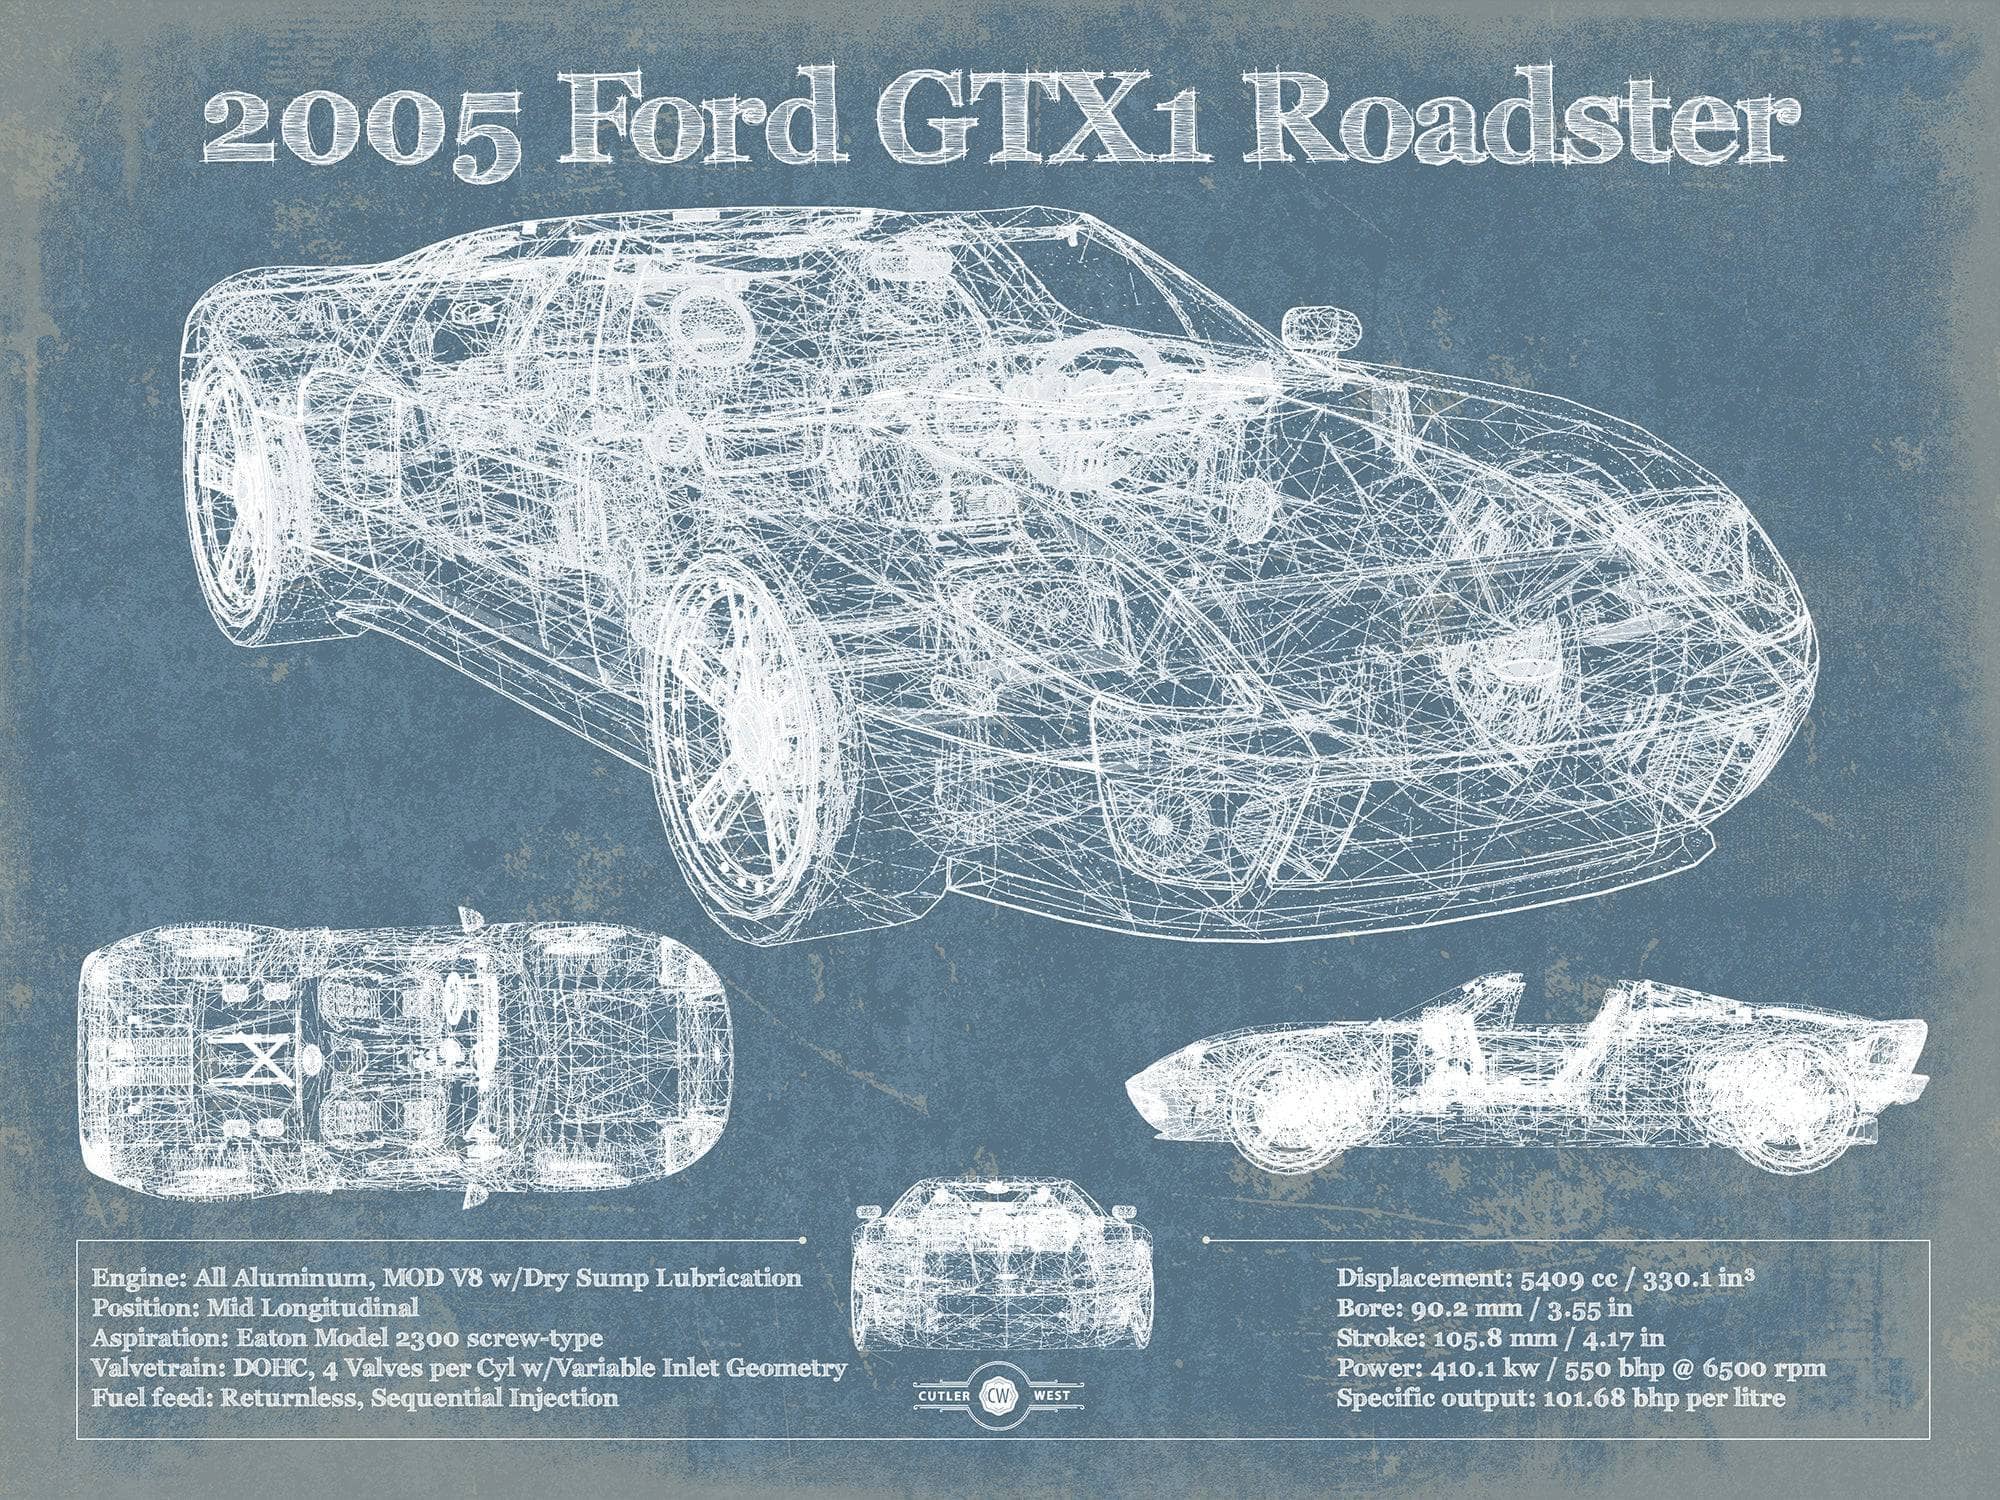 Cutler West Ford Collection 14" x 11" / Unframed 2005 Ford GTX1 Roadster Vintage Blueprint Auto Print 933350037_17735